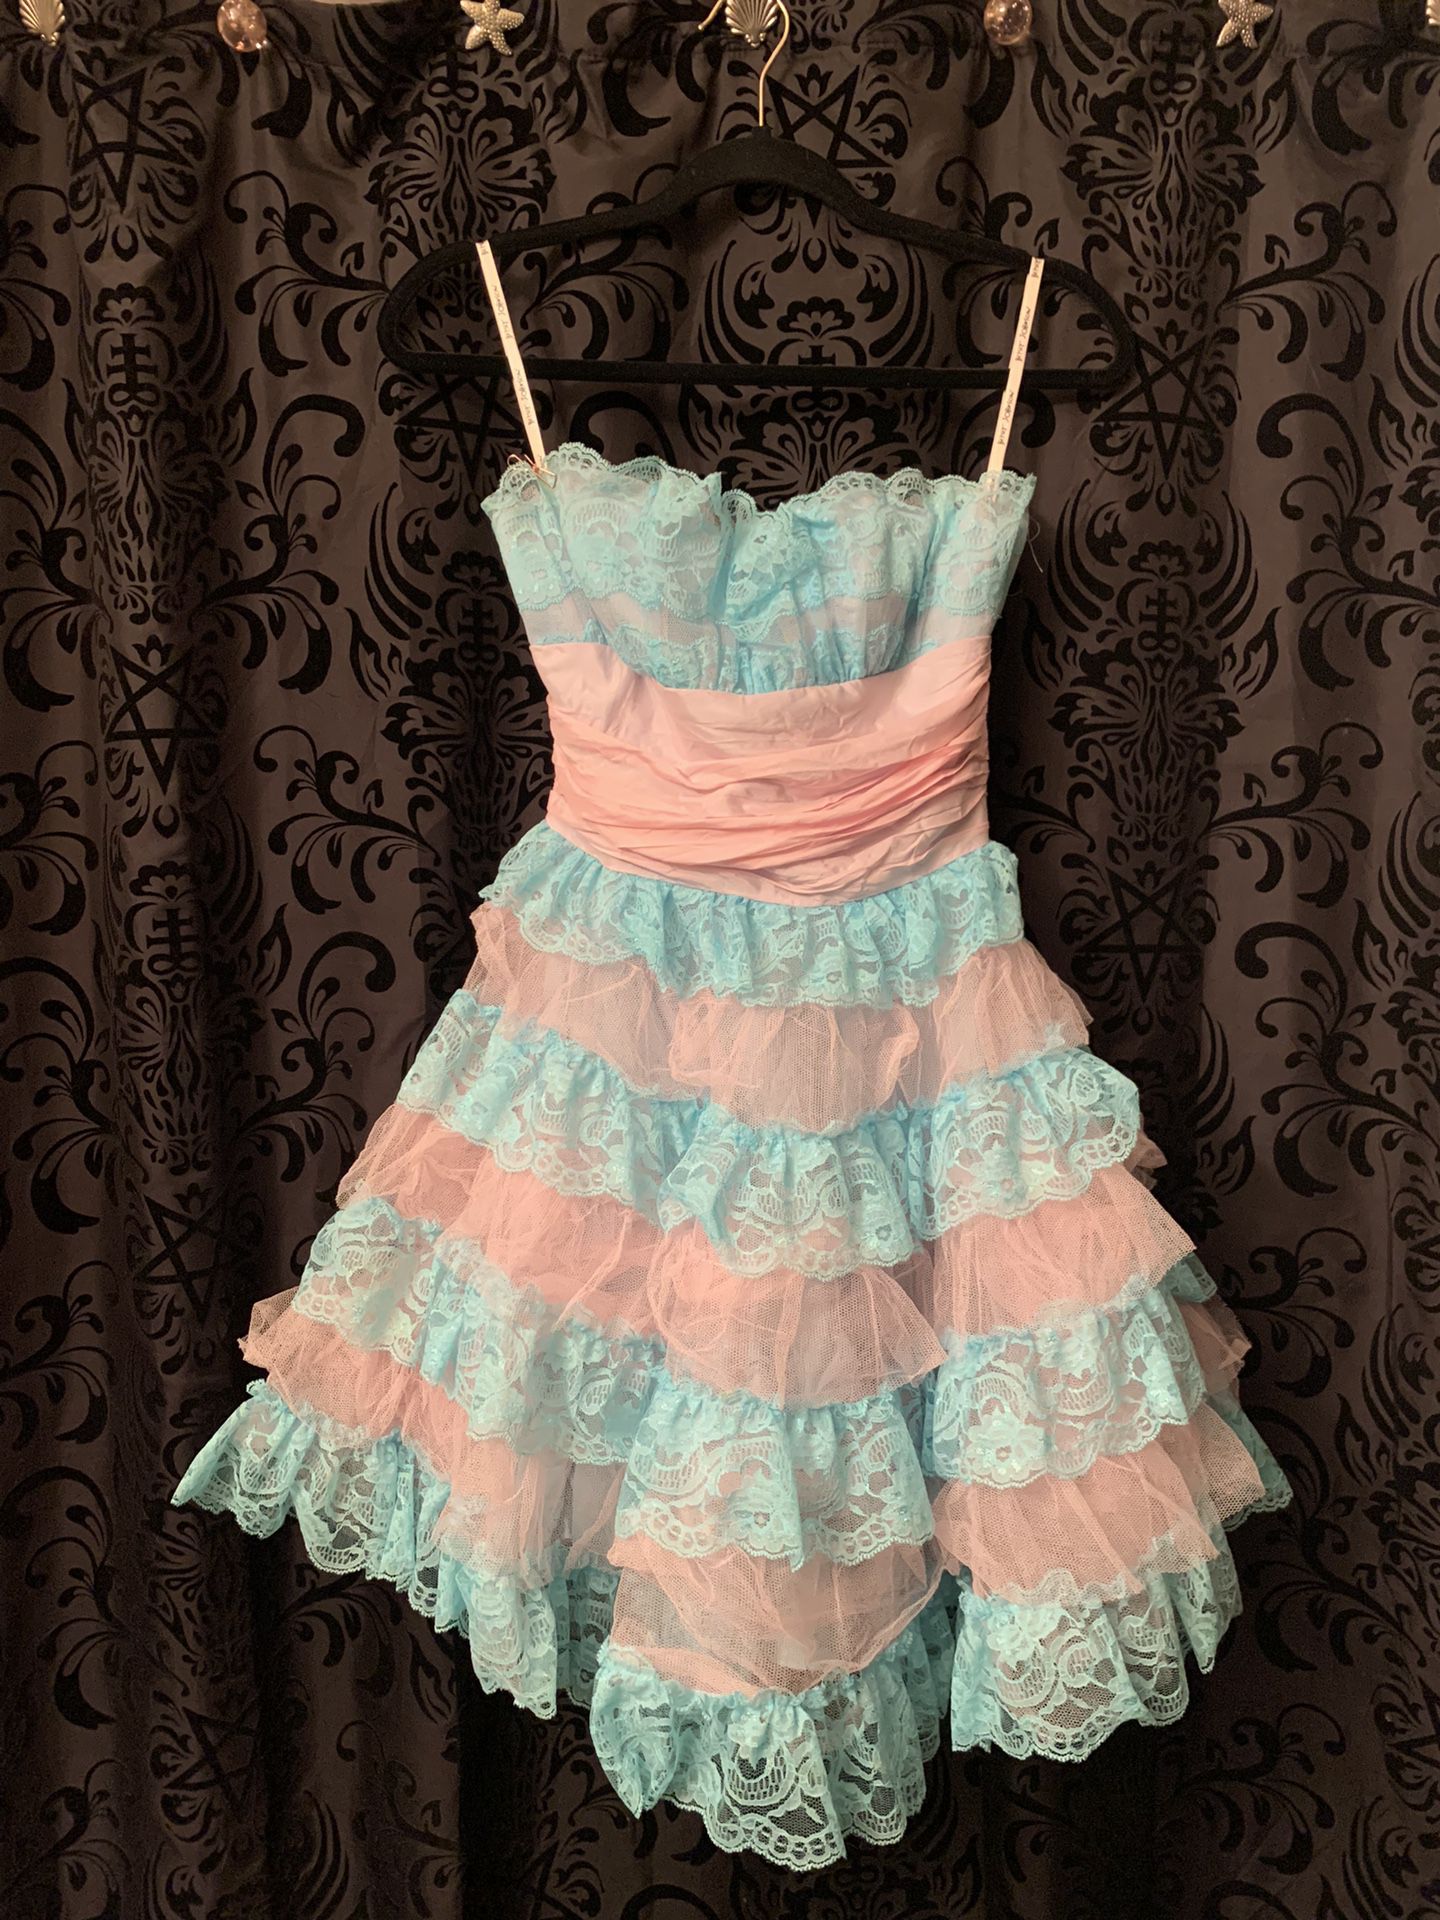 Betsey Johnson Evening Strapless Cocktail Dress 6 Pink Blue PromTiered Tulle Lace